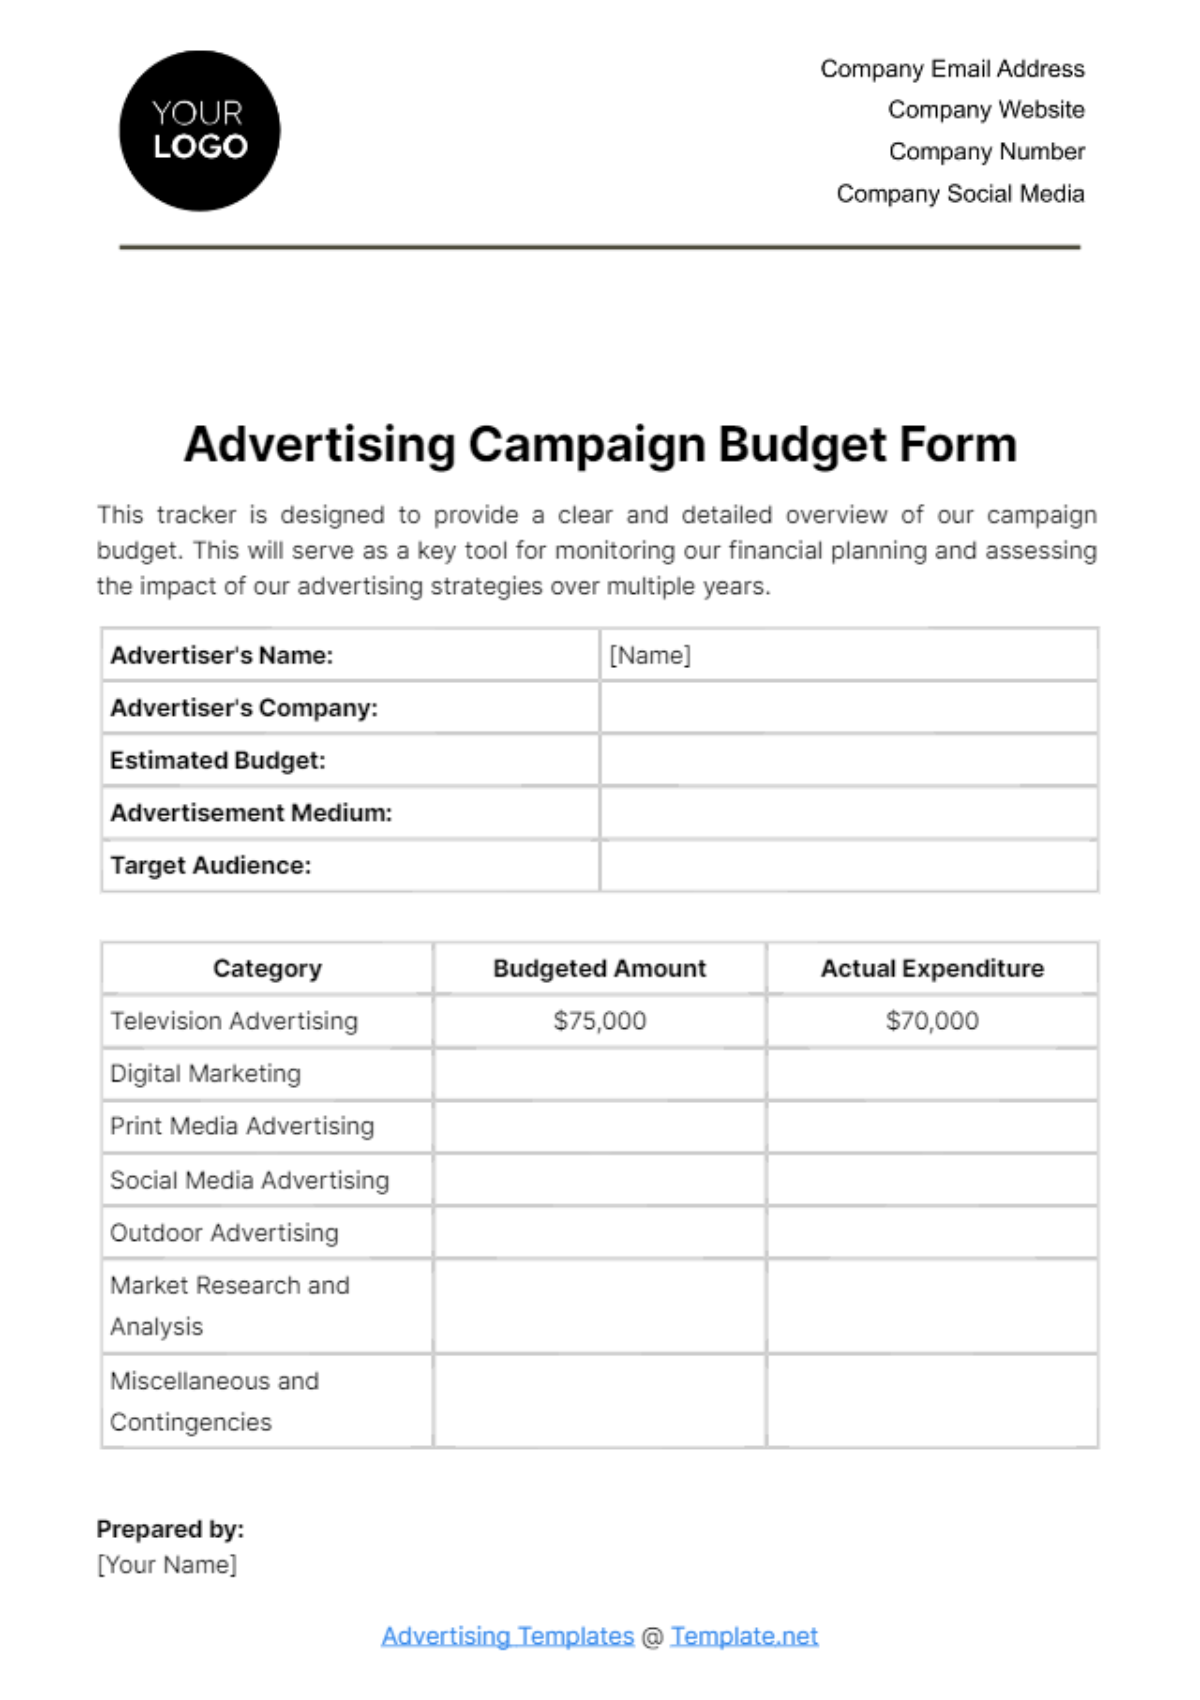 Advertising Campaign Budget Form Template